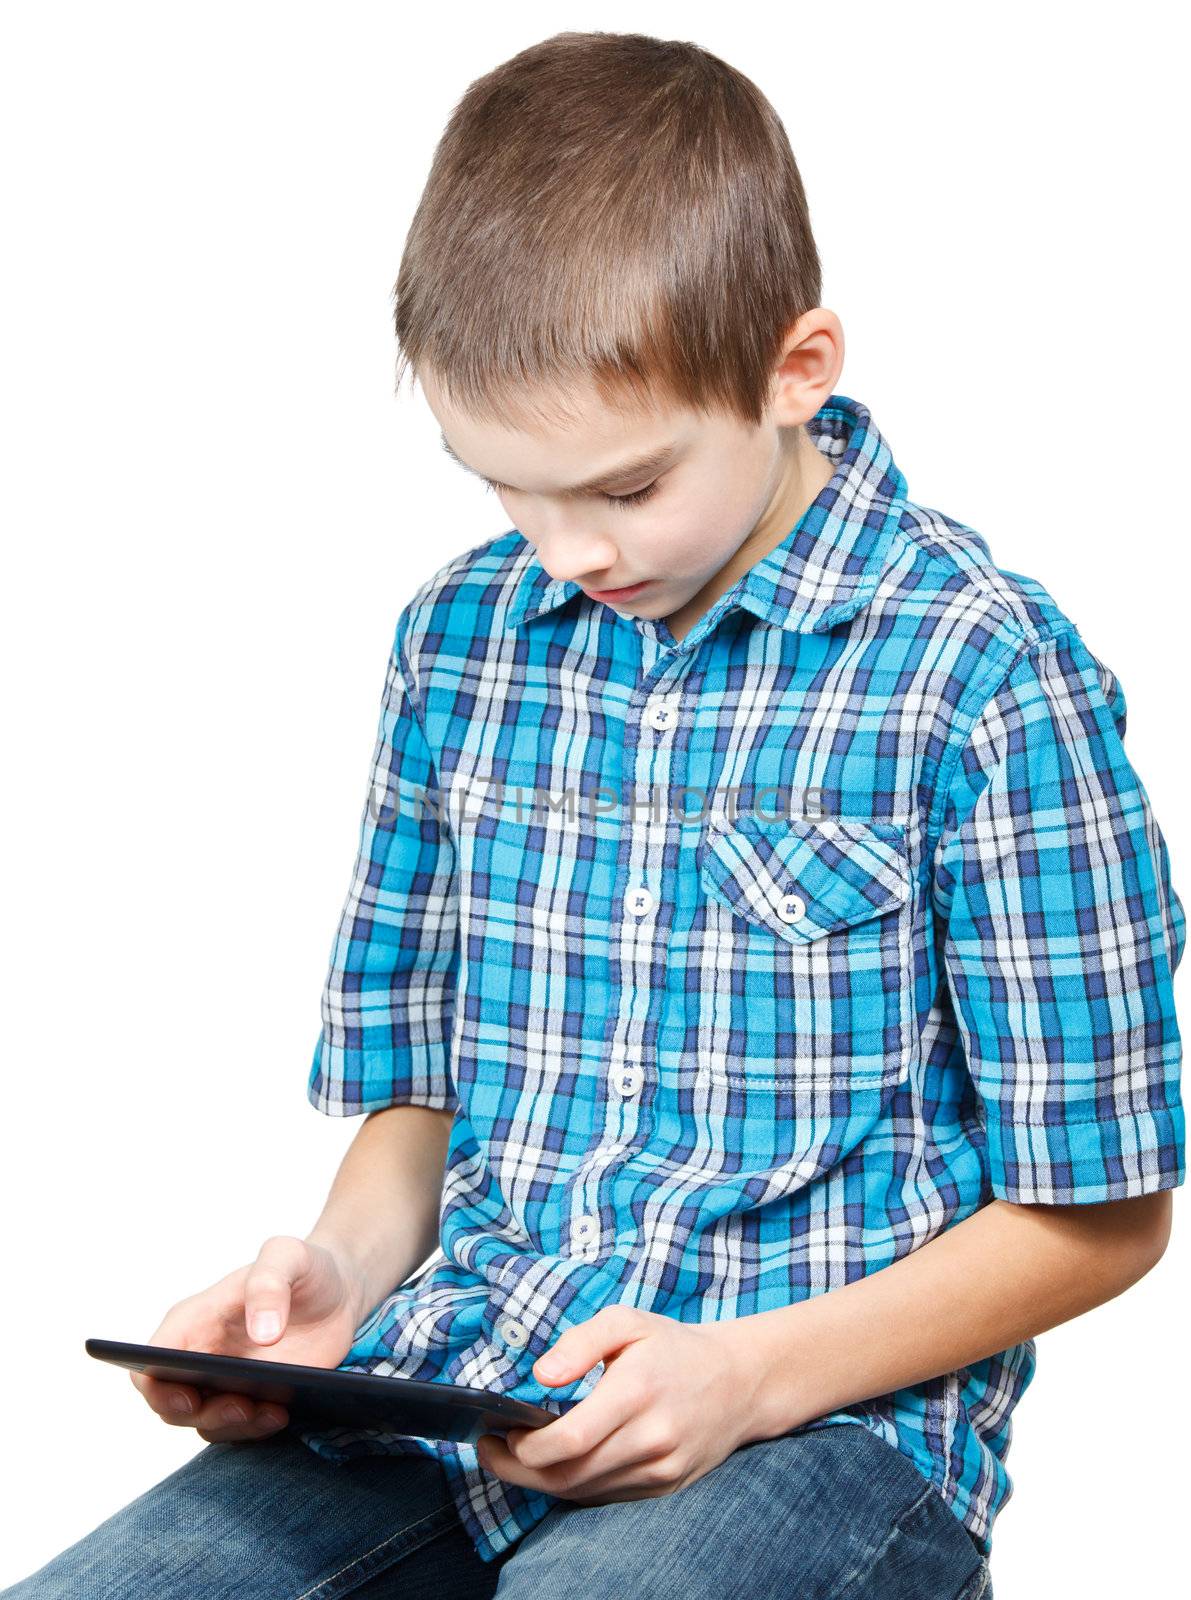 Portrait of 10 years boy wearing blue shirt using a touch pad